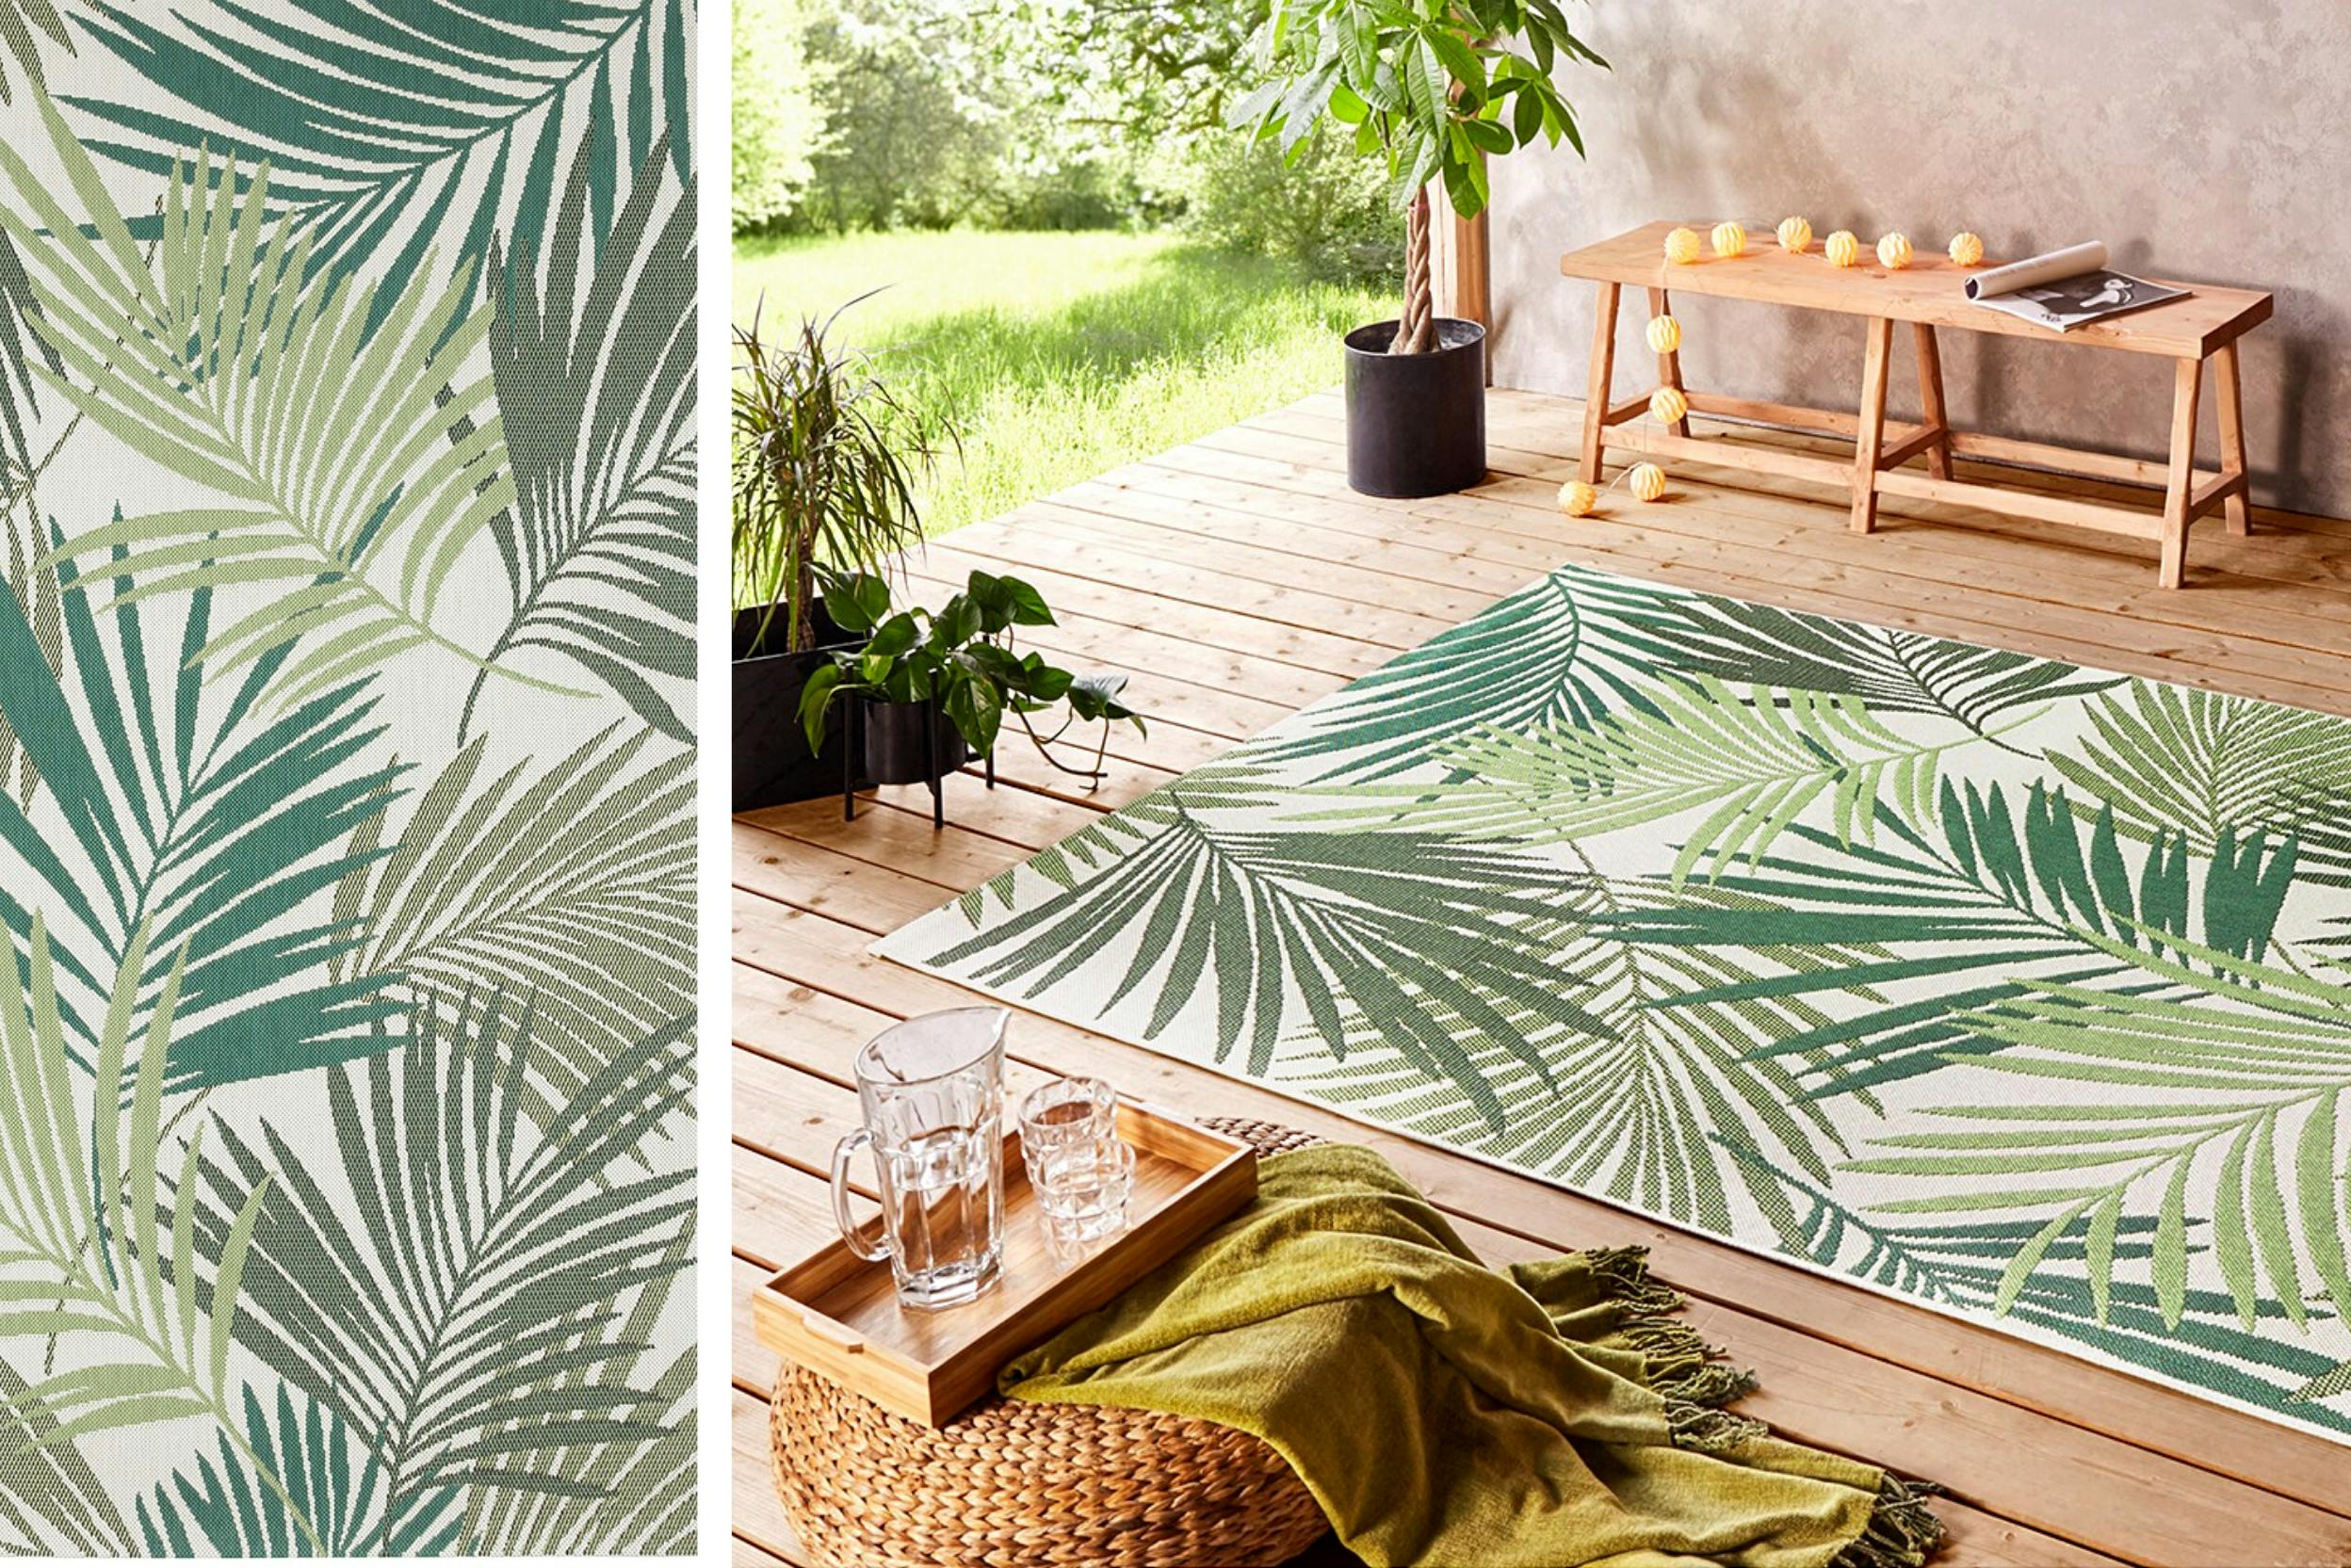 https://images.prismic.io/home24-production/64f6c95a-e122-457a-a42b-589ffbec92ac_ratgeber-material-outdoor-teppich-tropical-print-home24.png?auto=compress,format